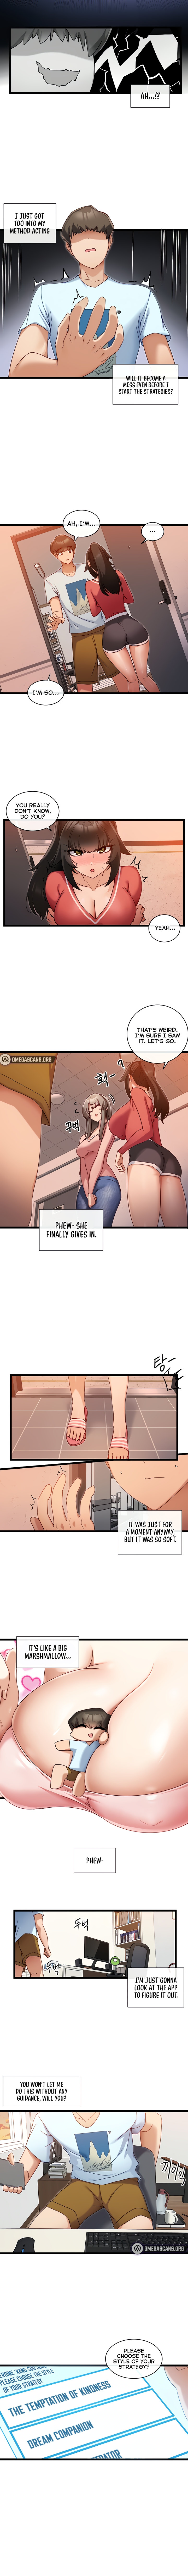 Heroine App - Chapter 7 Page 3